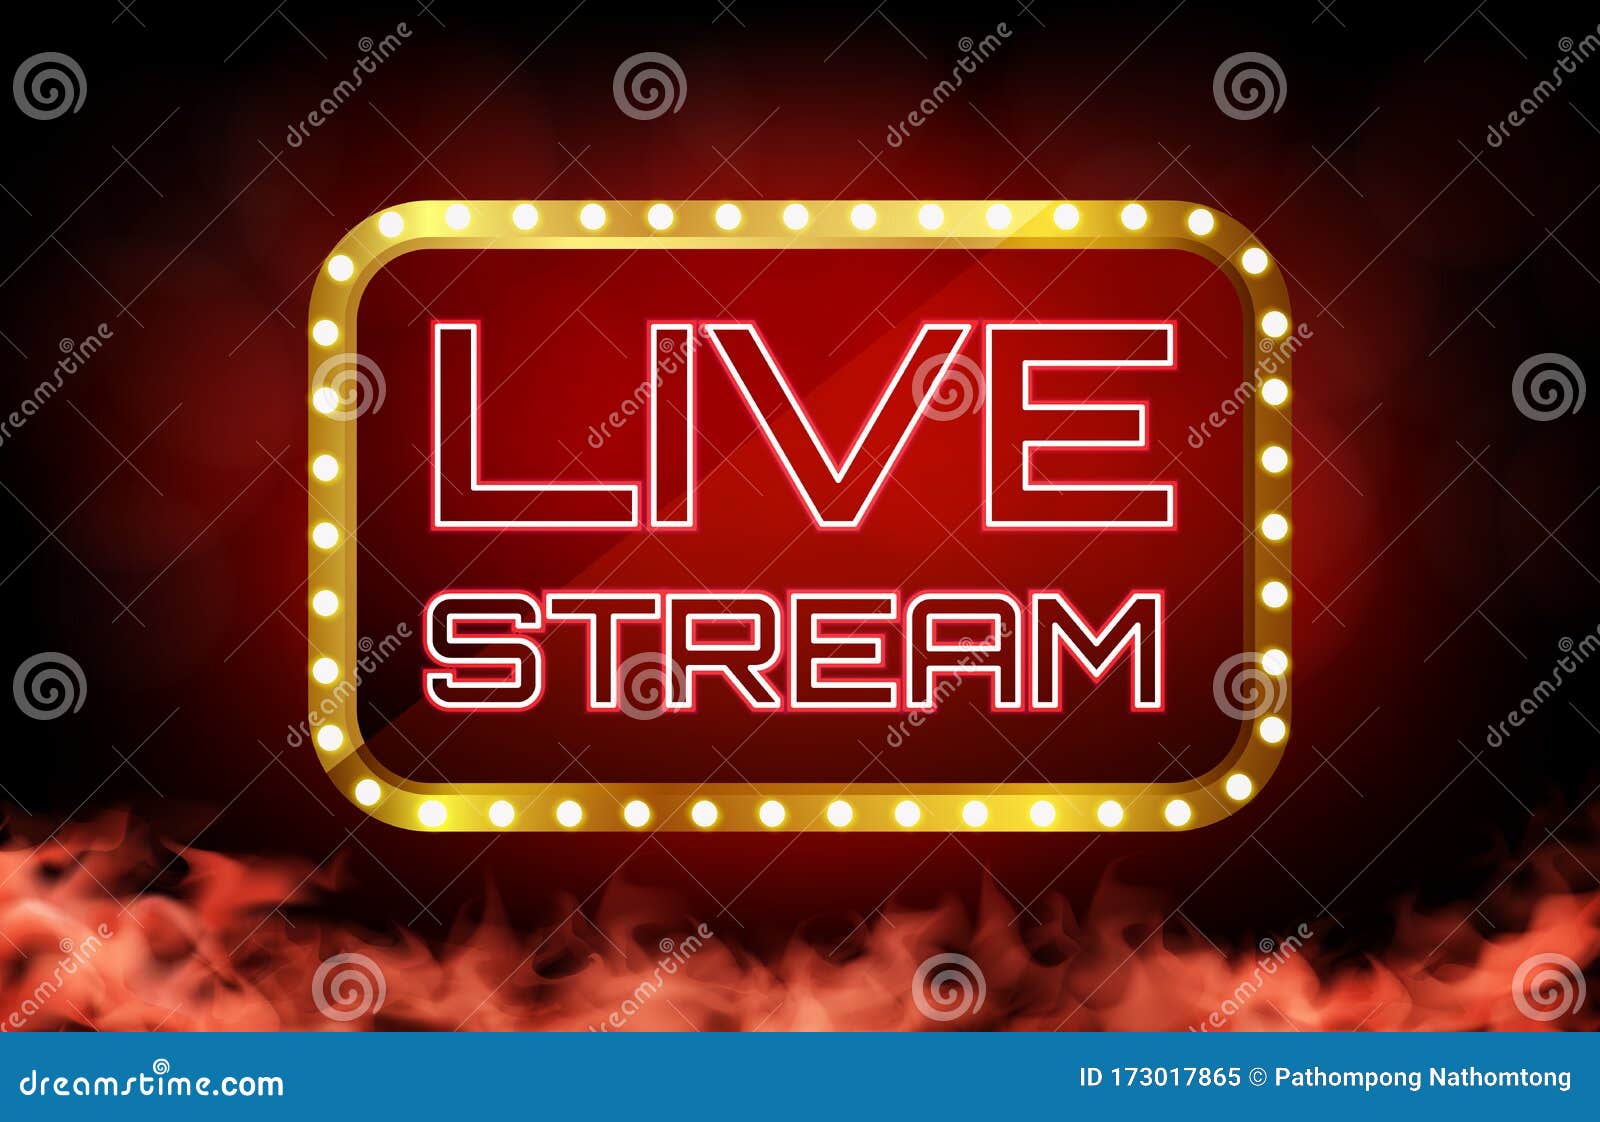 Background of Red Neon Live Stream Sign,online Casino Concept ...